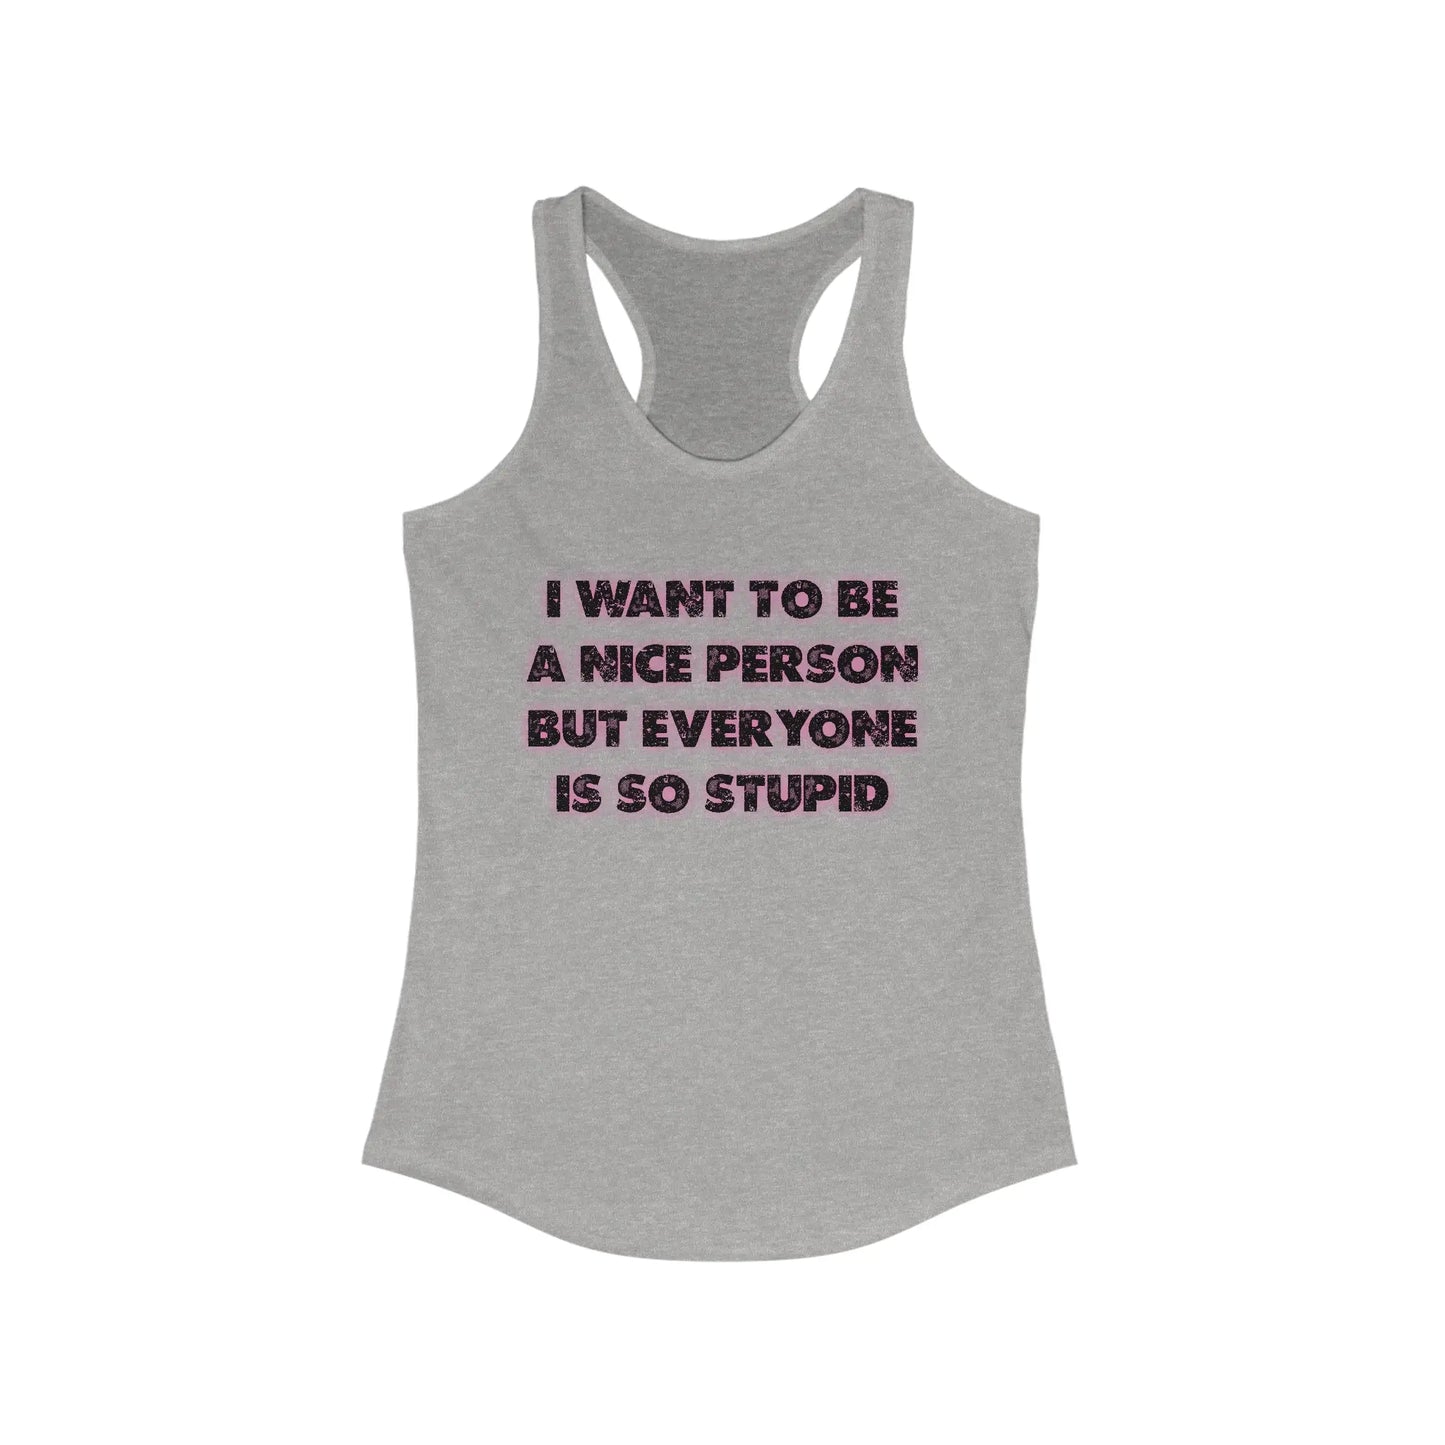 I Want To Be A Nice Person Women's Tank - Wicked Tees